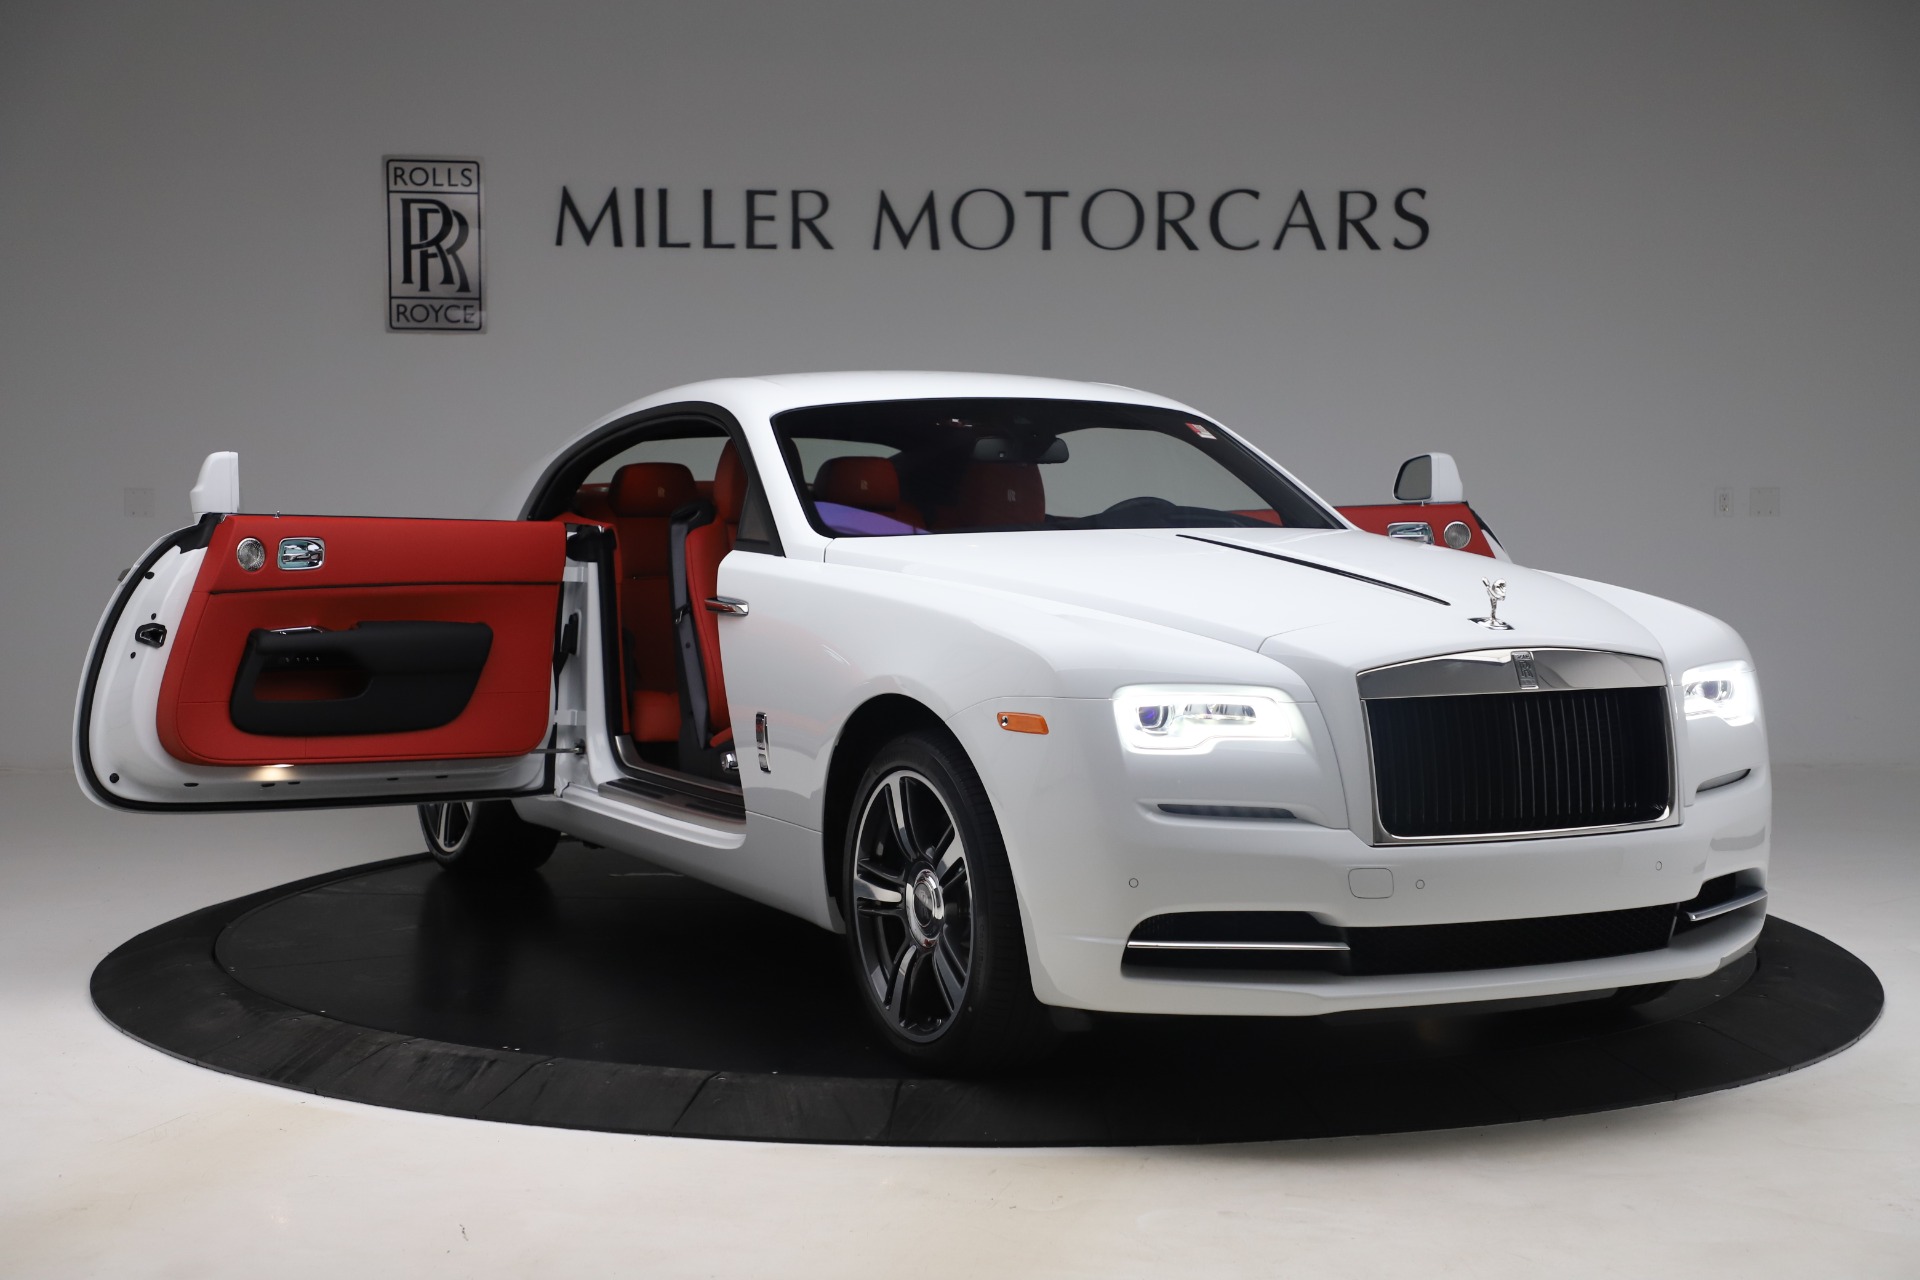 2020 RollsRoyce Wraith  News reviews picture galleries and videos  The  Car Guide